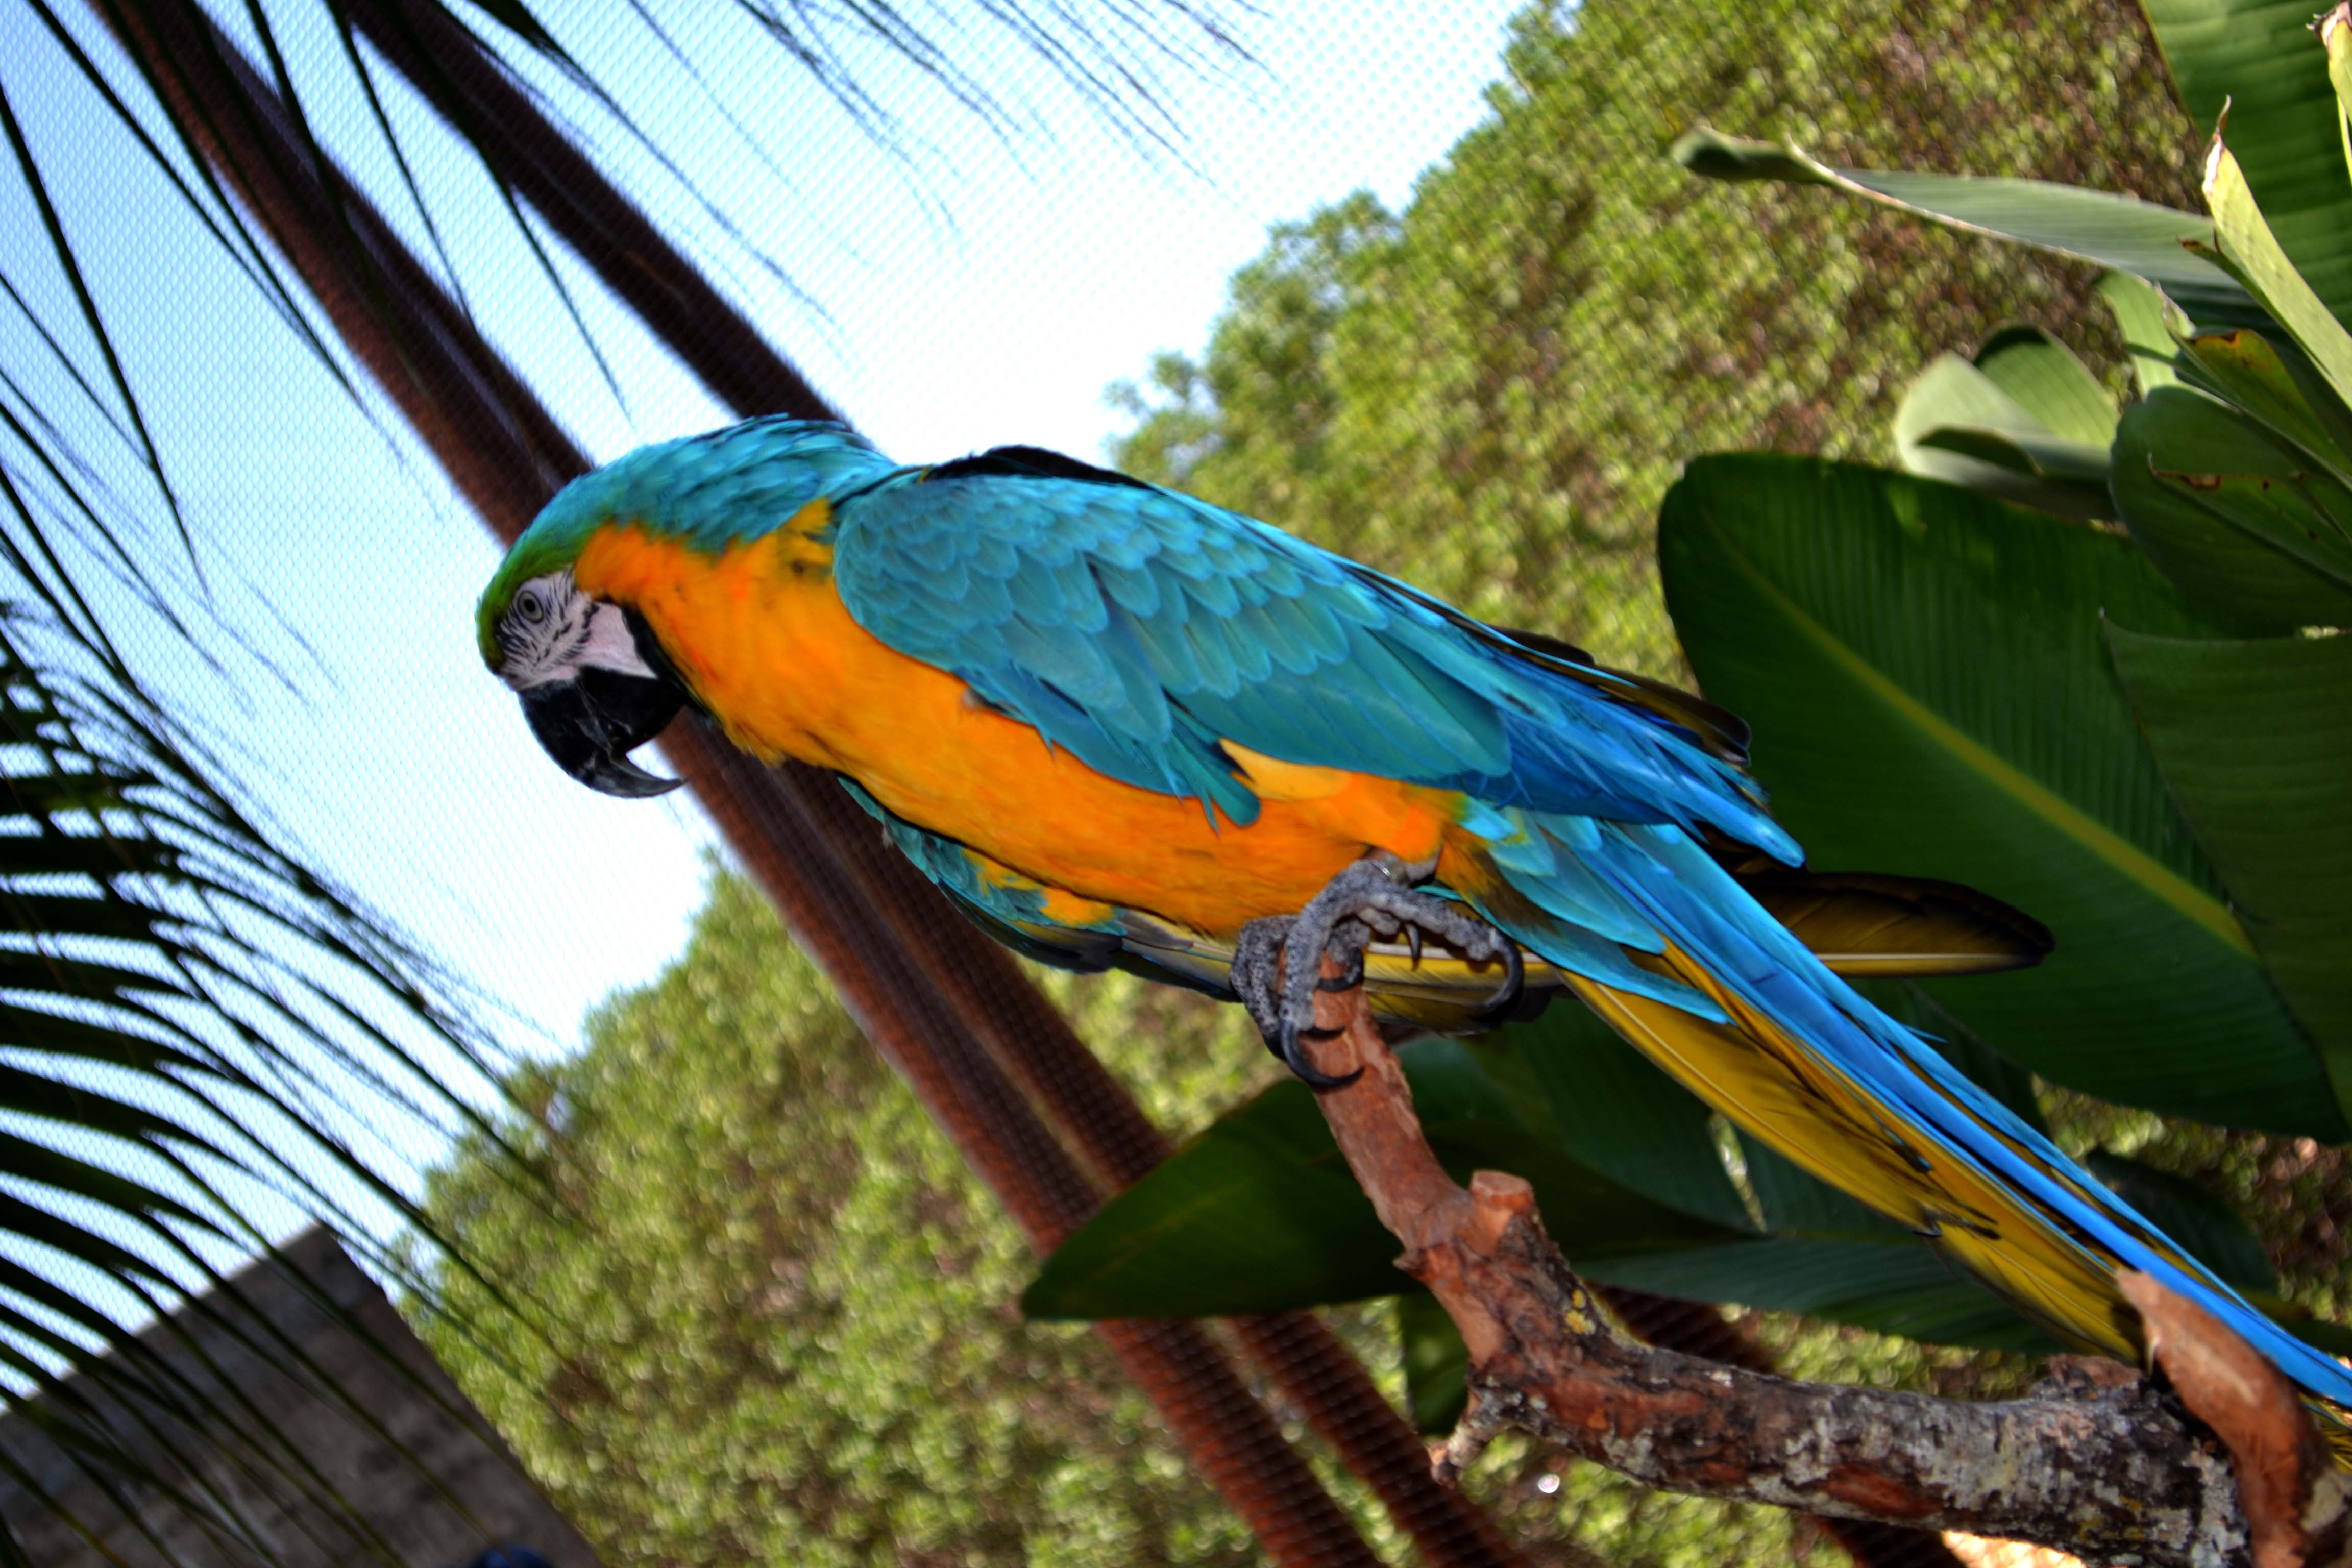 General 4608x3072 macaws animals birds parrot Blue-and-Yellow Macaw closeup